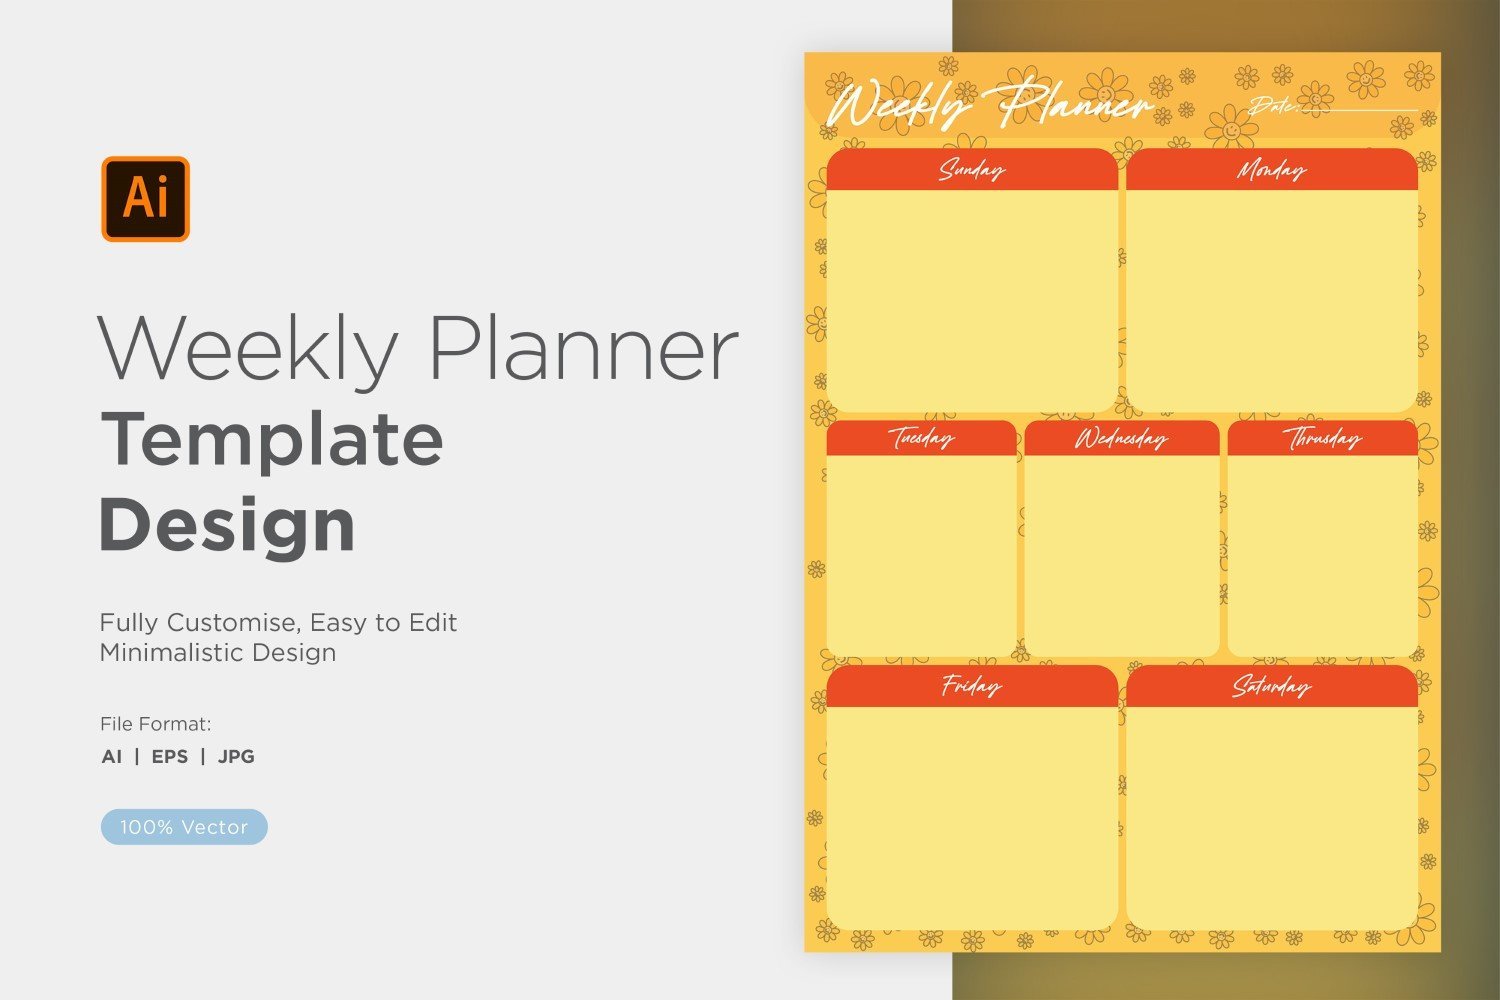 Kit Graphique #357838 Weekly Planner Divers Modles Web - Logo template Preview